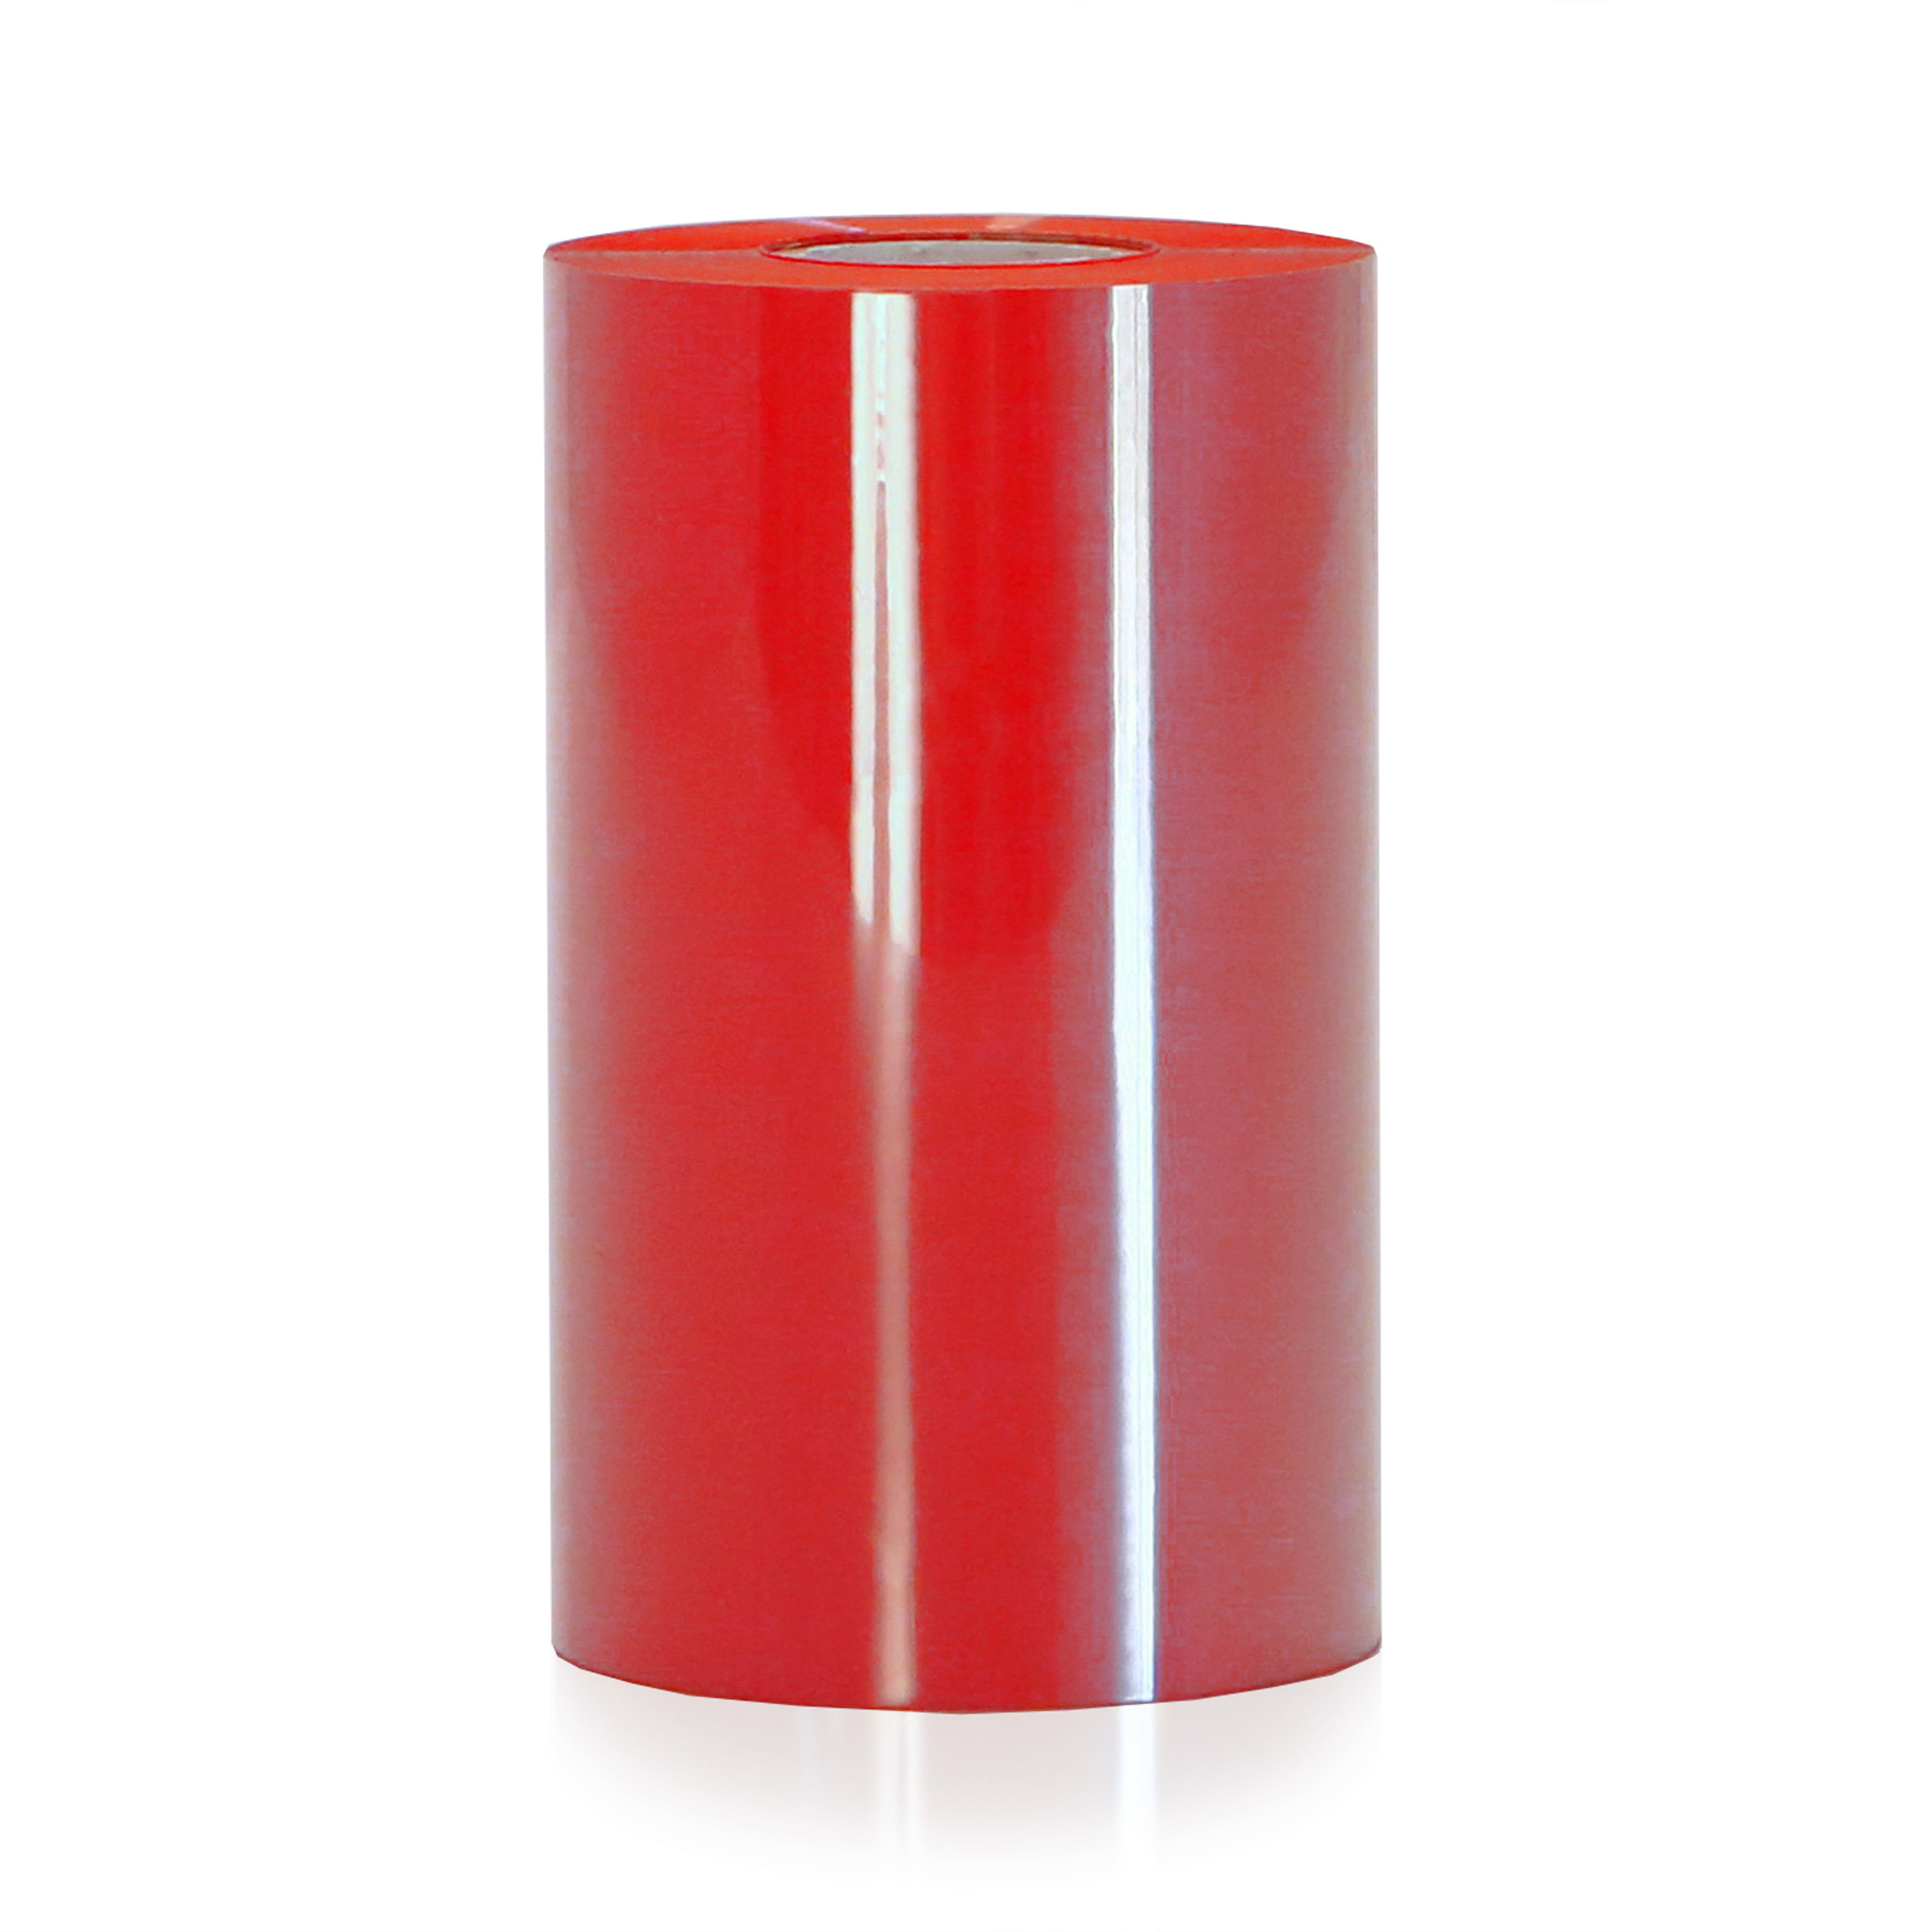 Ask a question about 4.3" x 984ft Premium High Visibility Red Ribbon